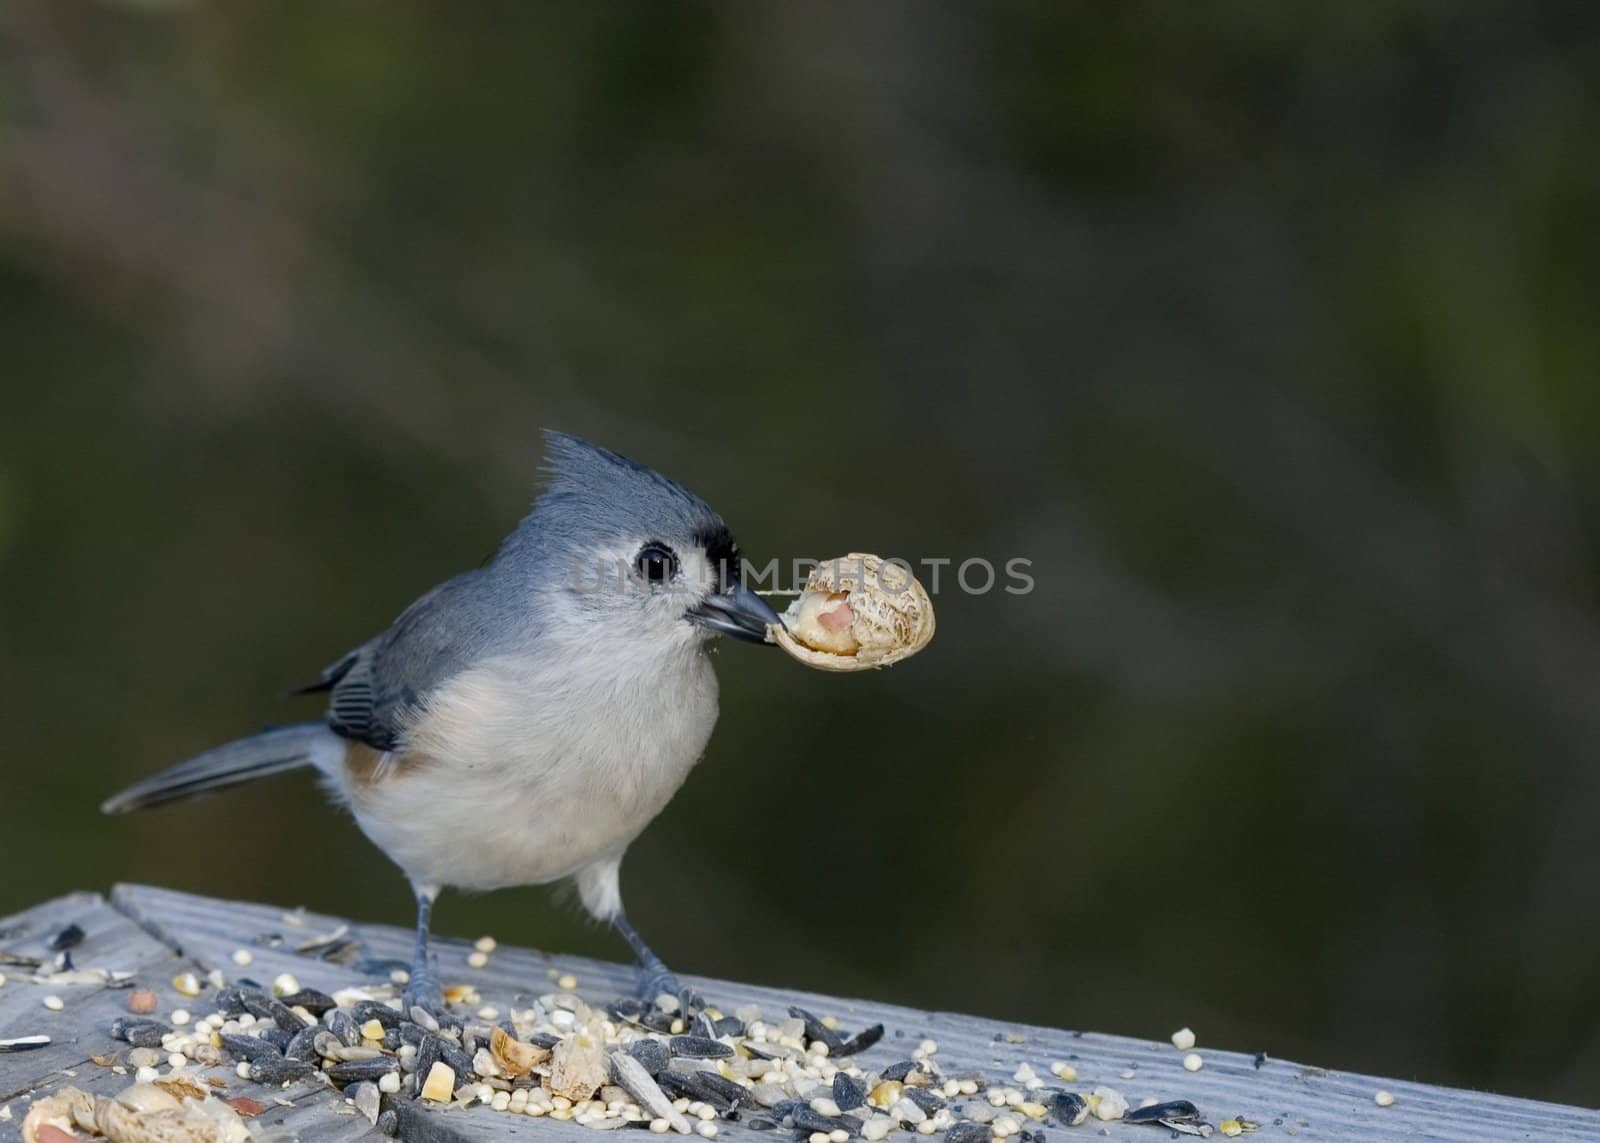 Titmouse eating a peanut on a wooden railing.